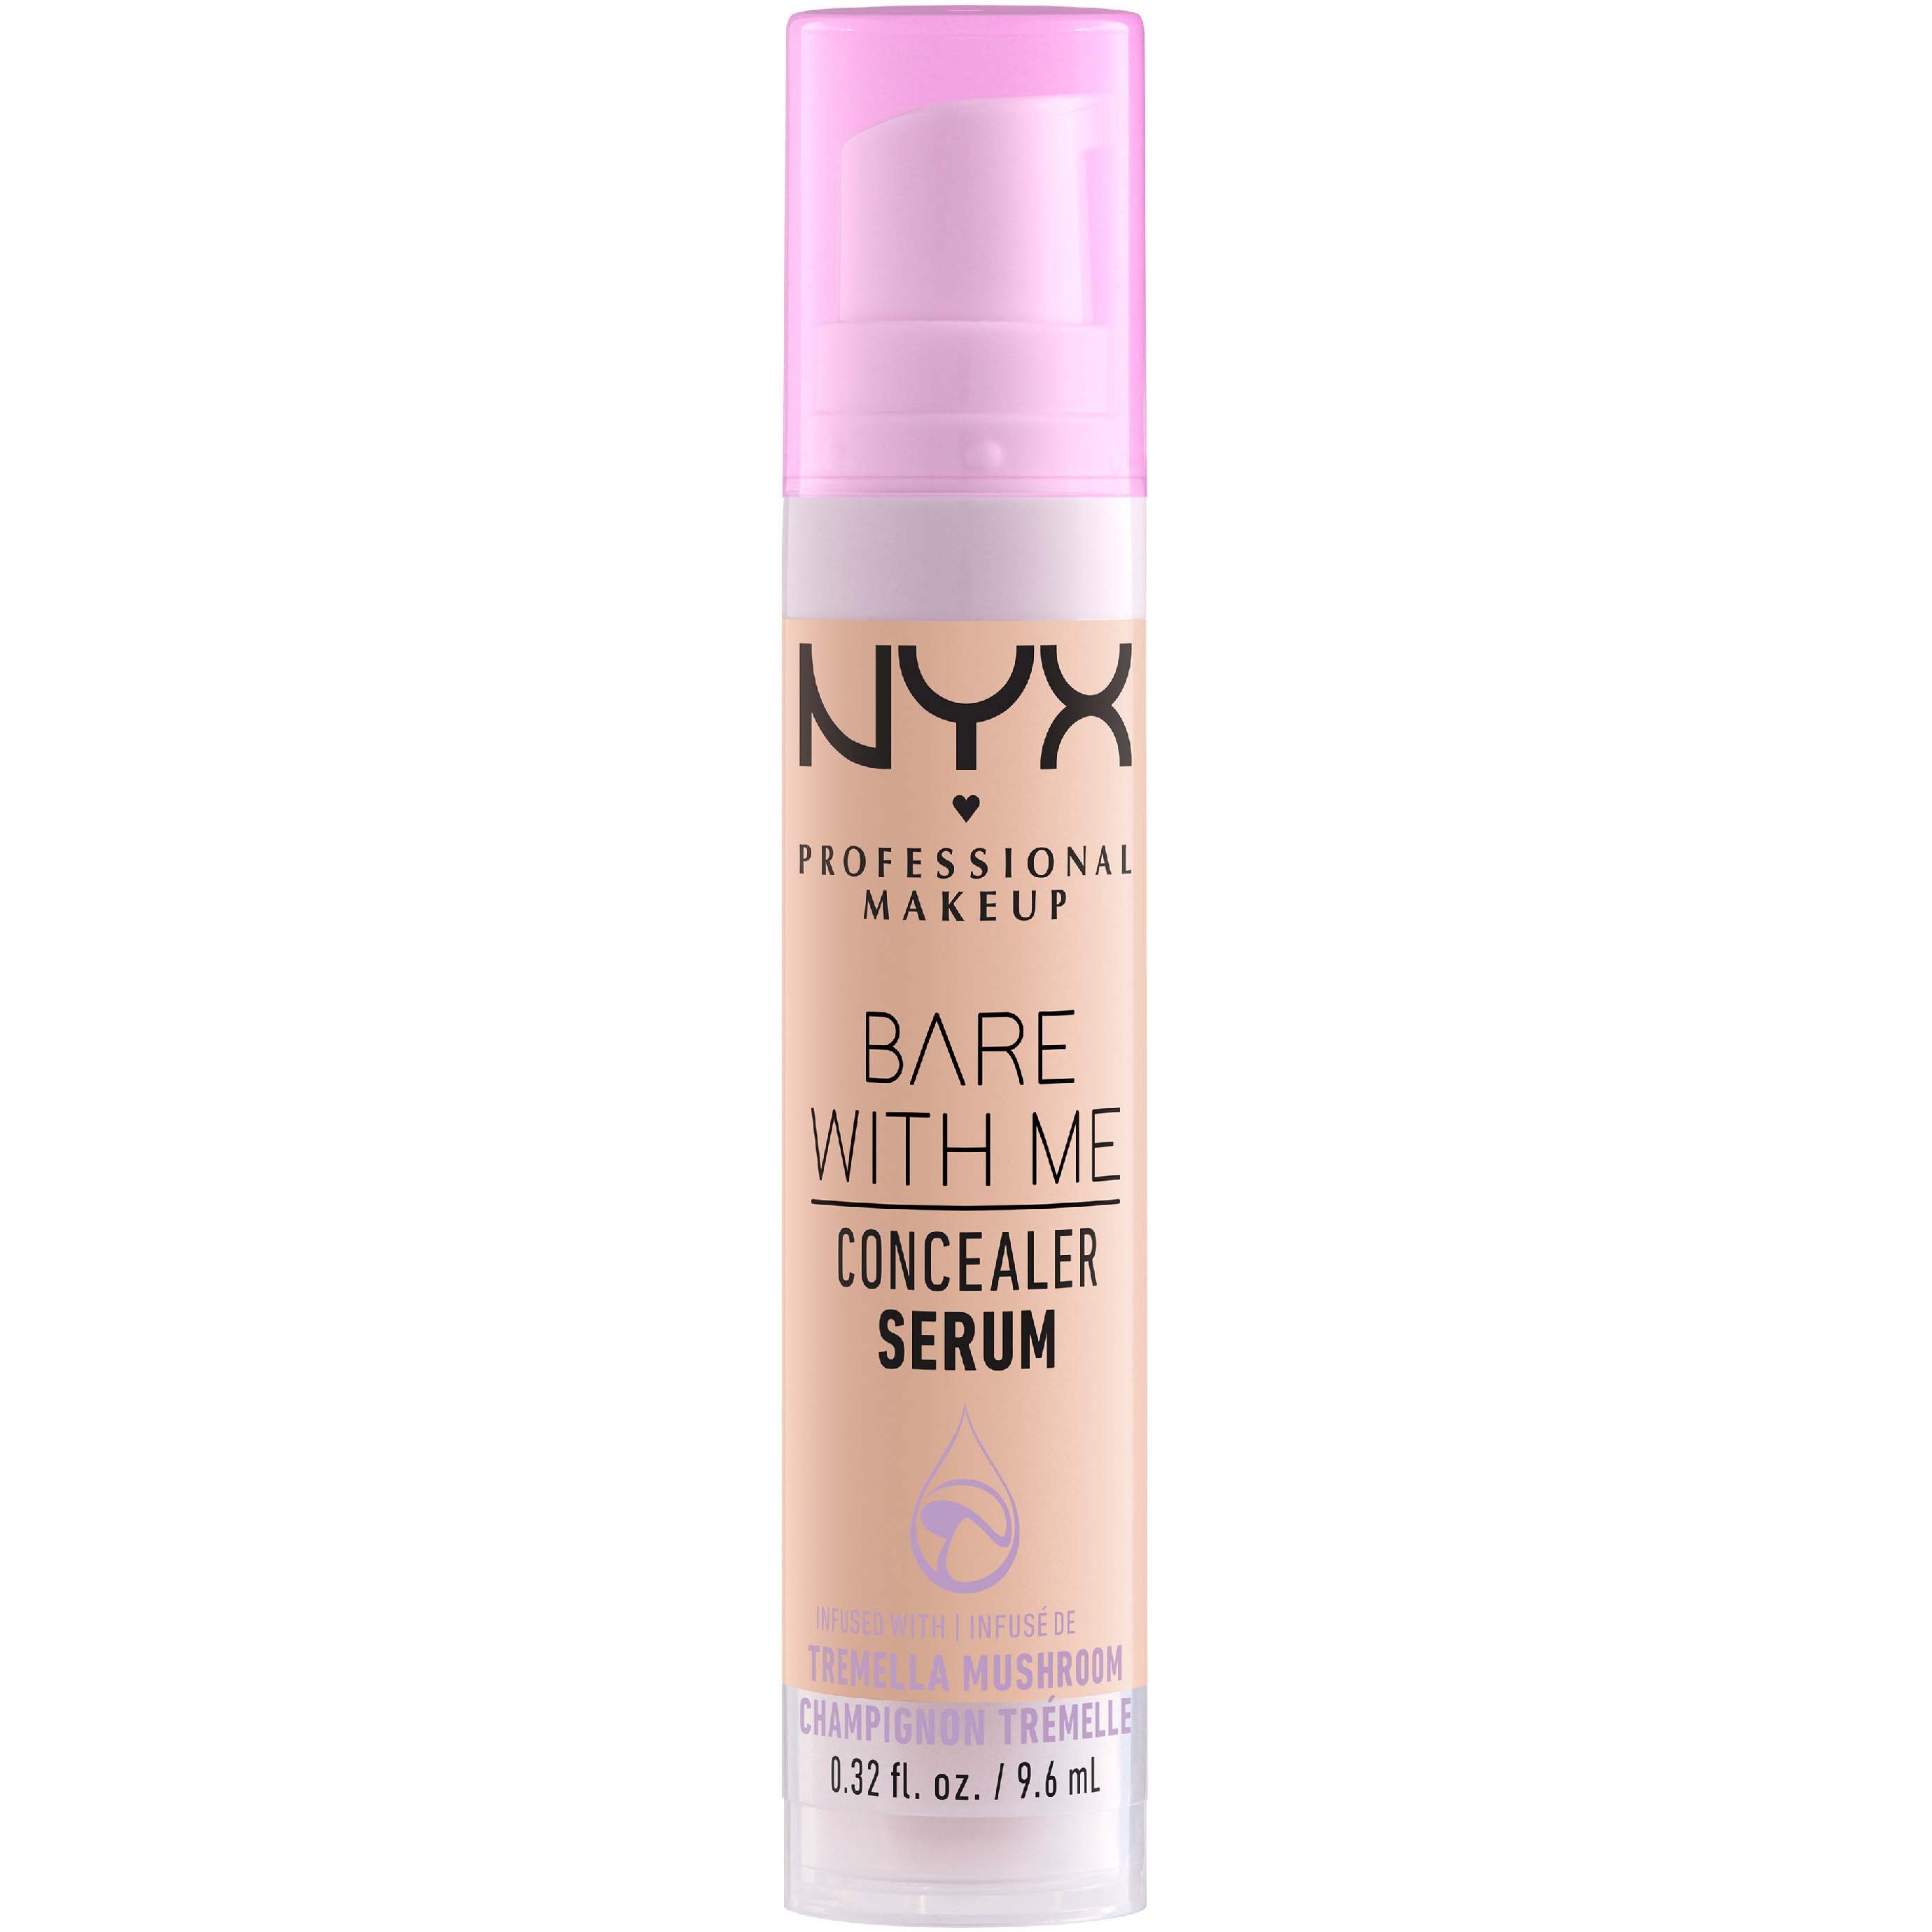 NYX PROFESSIONAL MAKEUP Bare With Me Concealer Serum Light